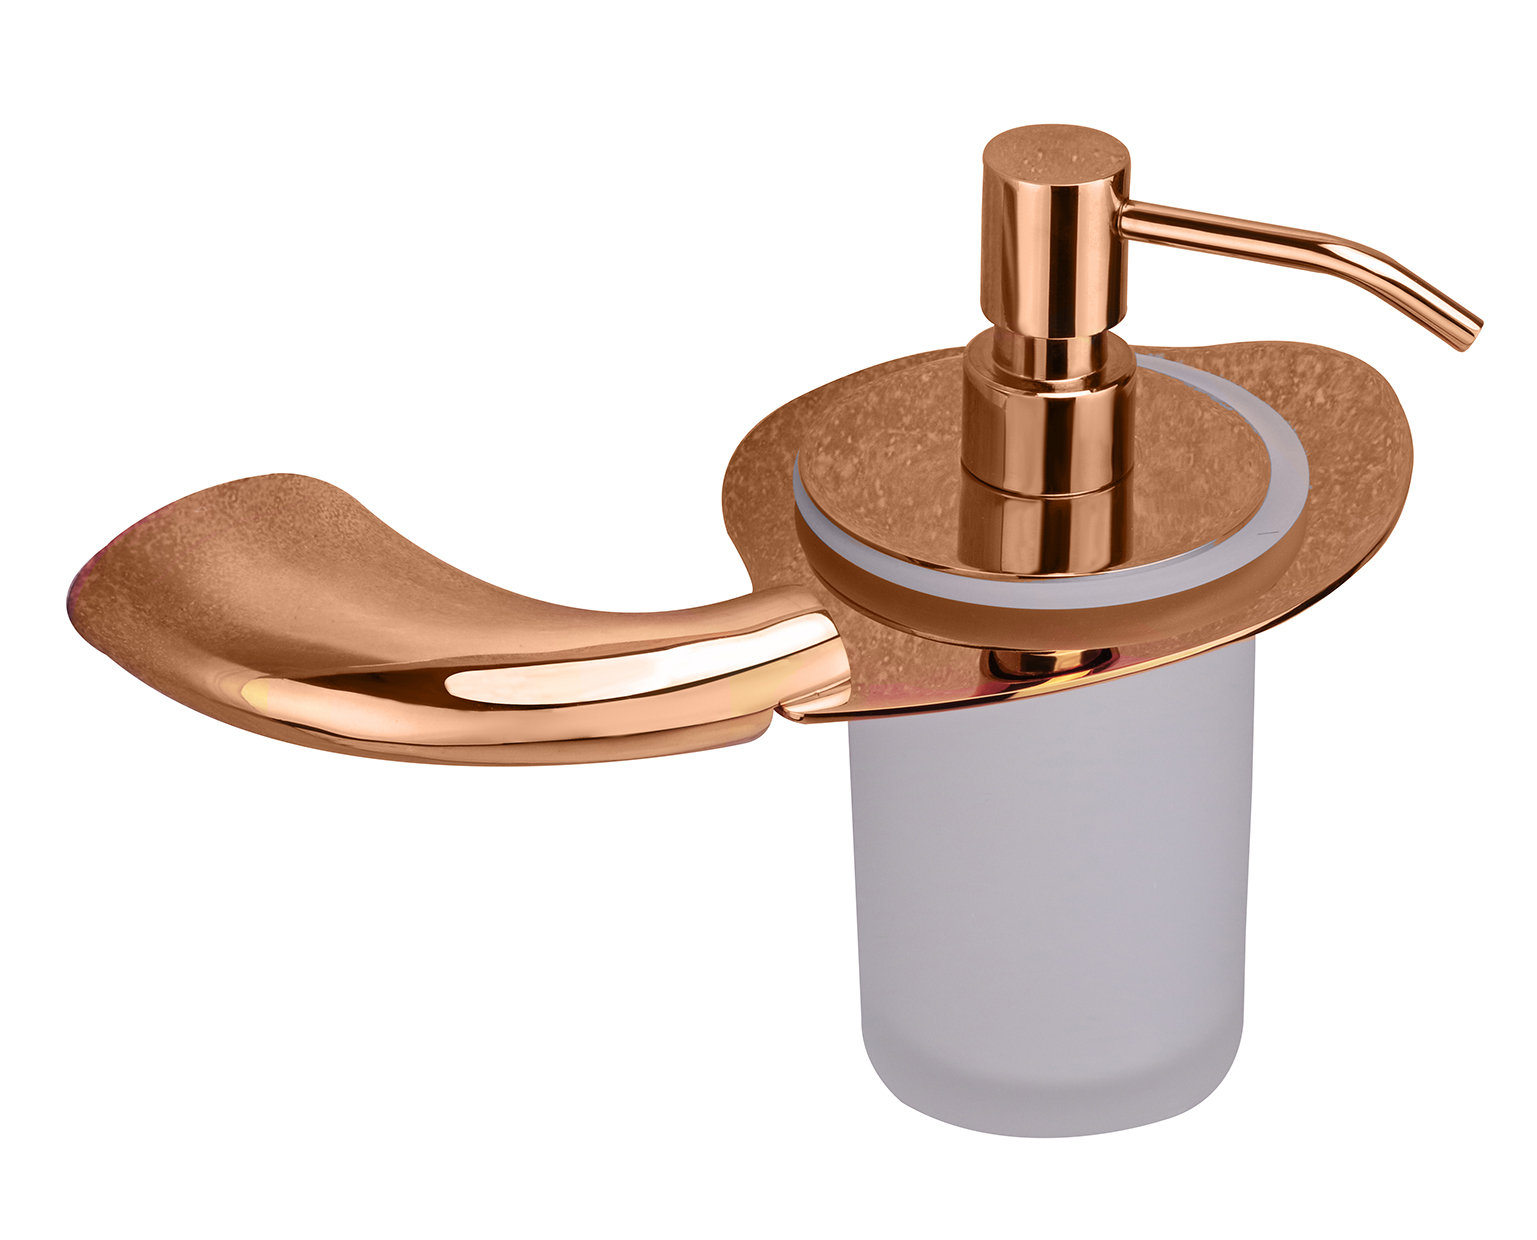 Aquieen Wall Mounted Liquid Soap Dispenser with Installation Kit (Entice Rose Gold)